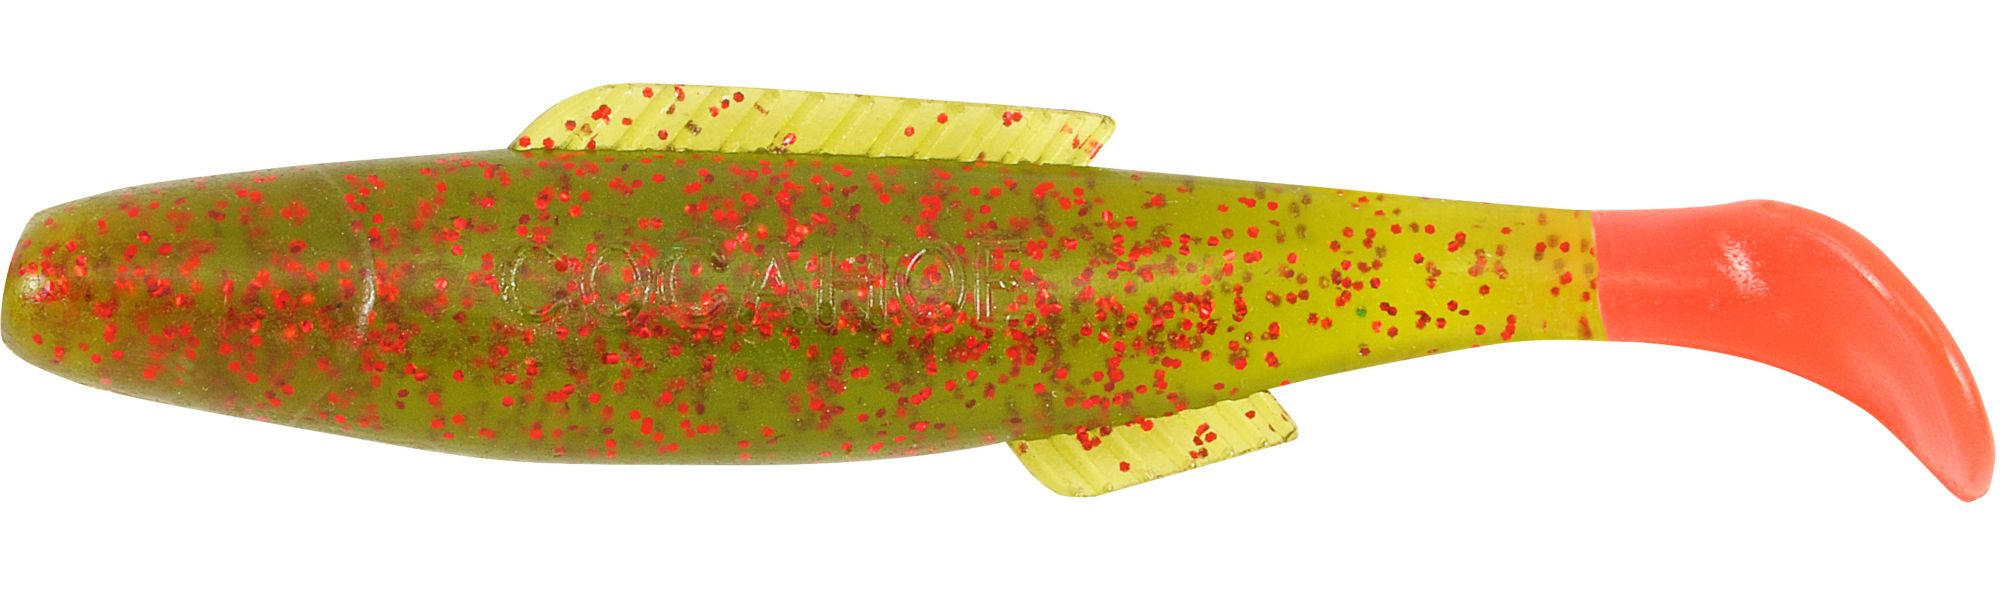 Dick's Sporting Goods H&H Cocahoe Minnow Saltwater Soft Bait